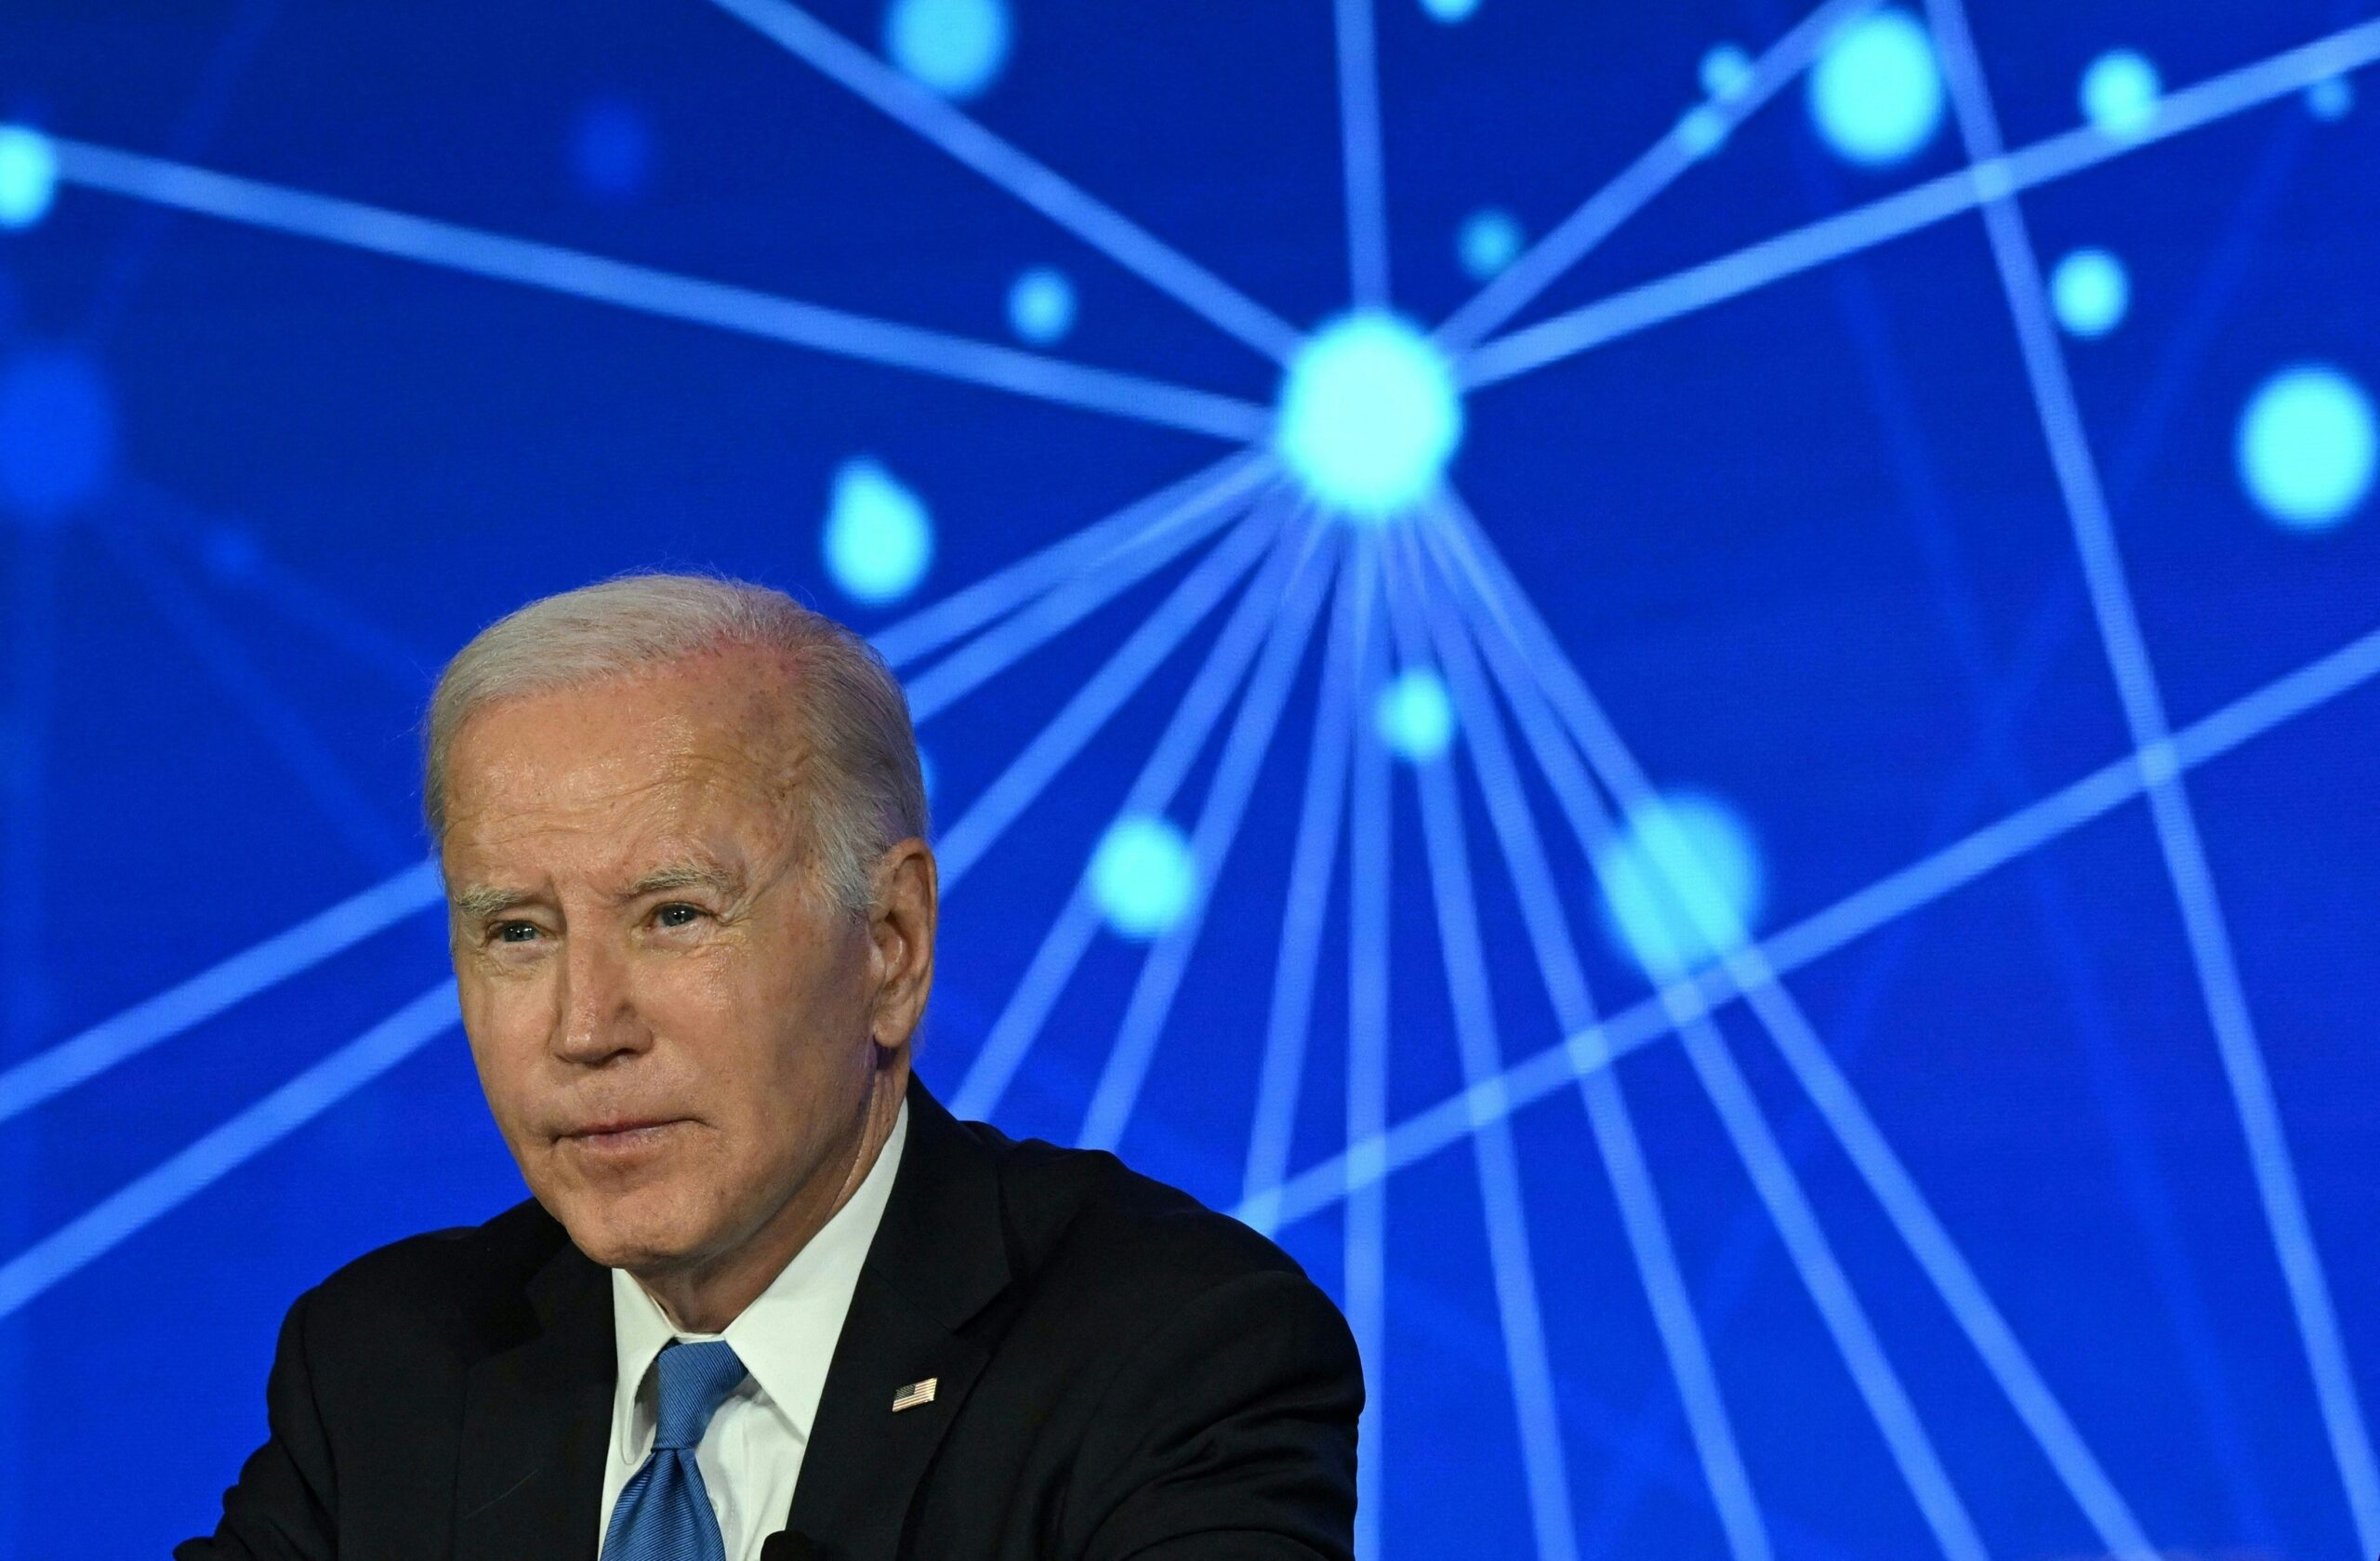 Joe Biden sits in front of an abstract blue backdrop. 